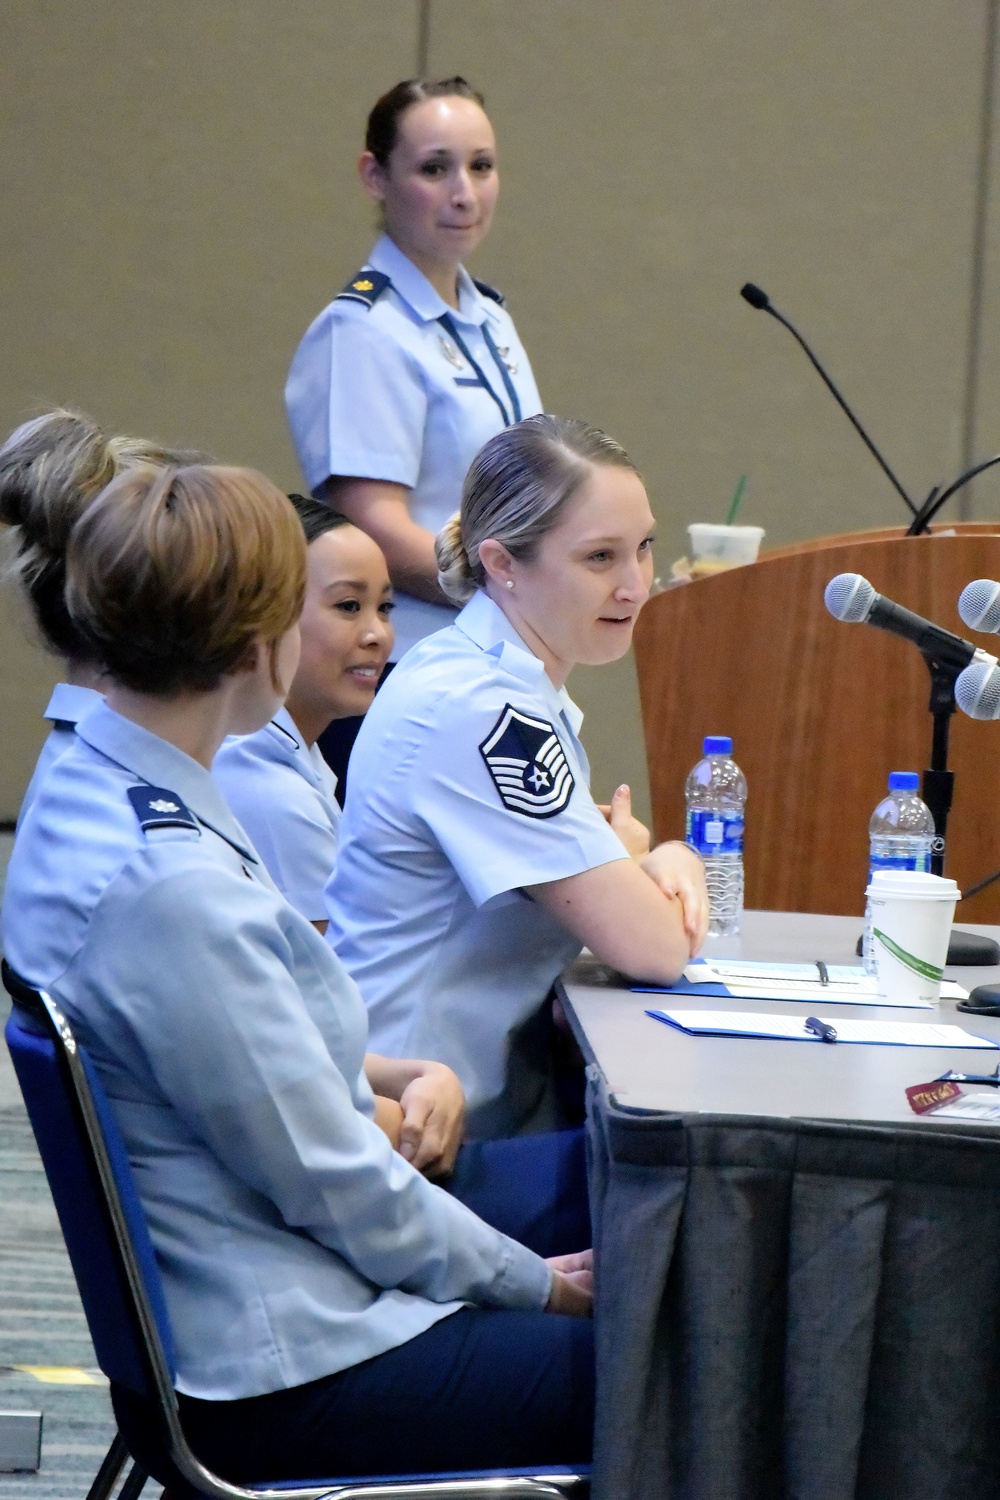 Sisters in service: Closing the joint warfighter’s diversity gap